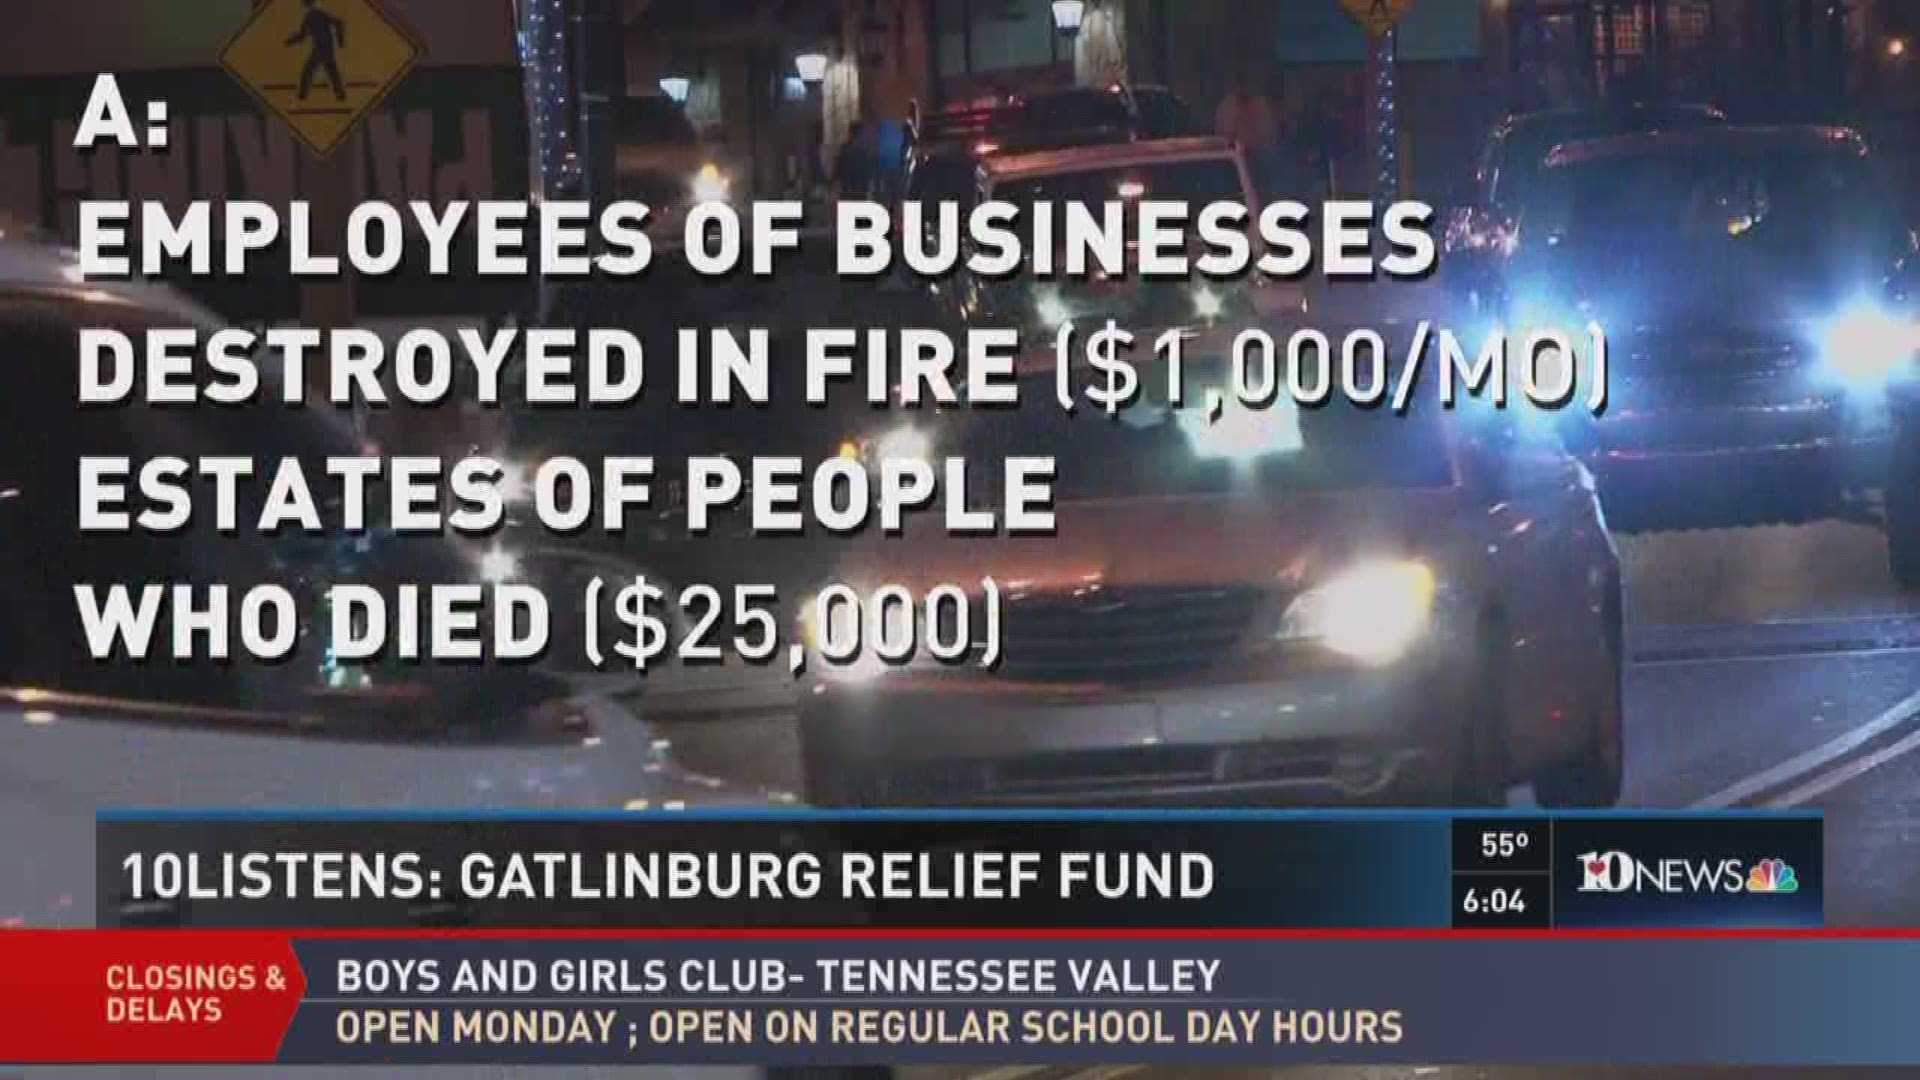 Answers to questions about the Gatlinburg Relief Fund.